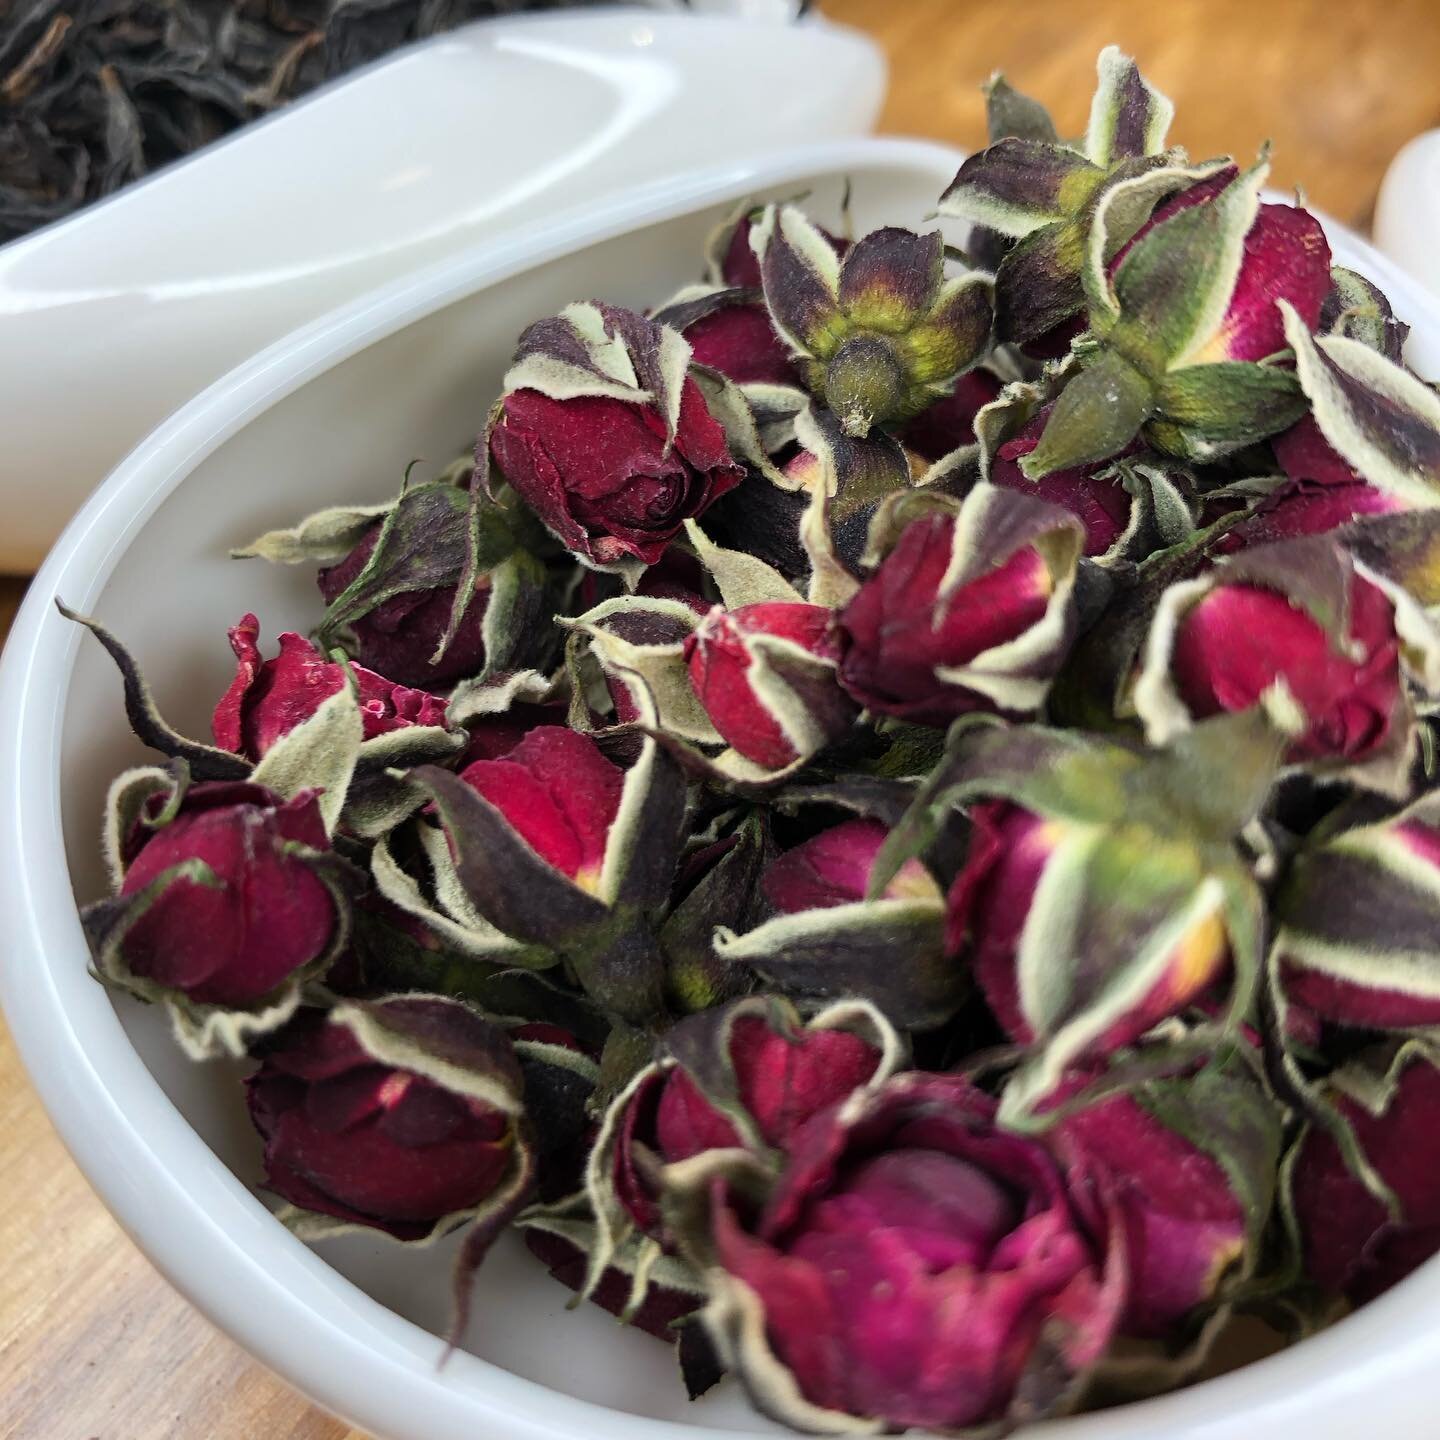 Sun dried wild rose buds from Yunnan. Try them in your favorite tea or herbal blend.